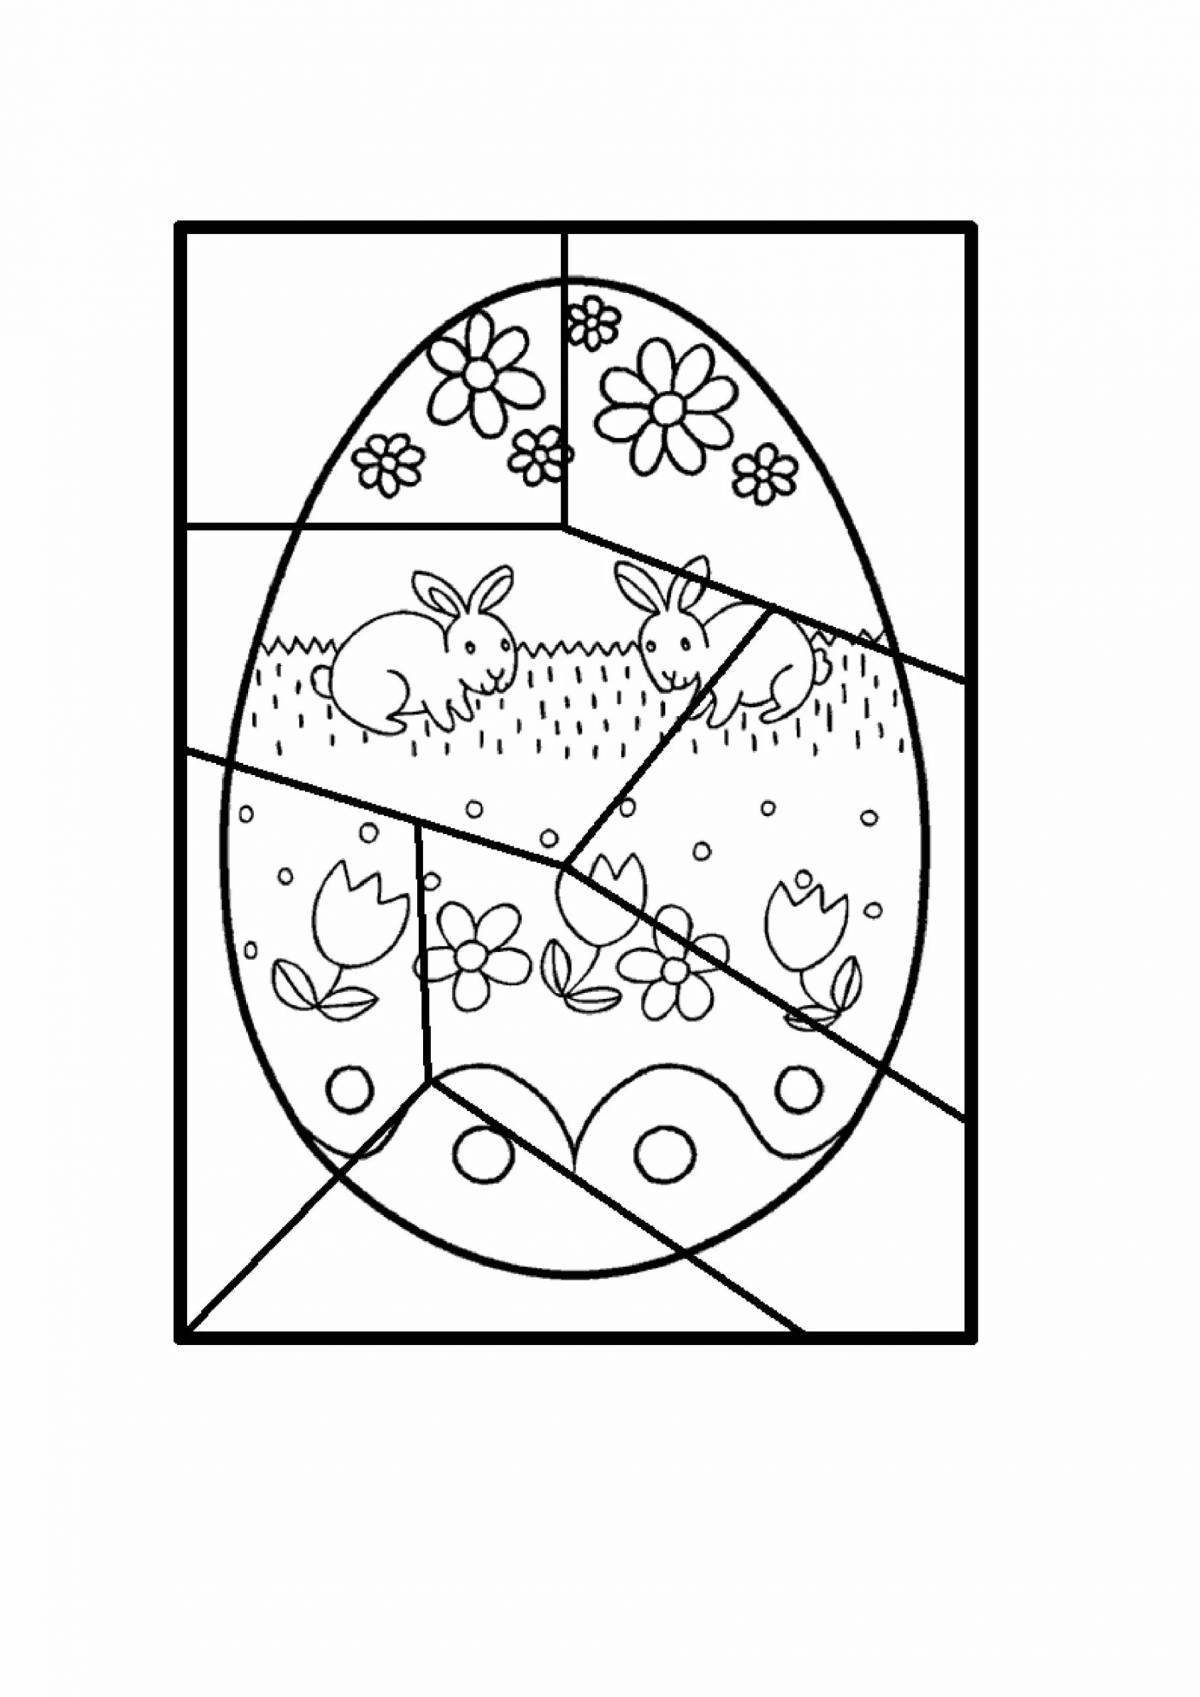 Fun coloring puzzle for kids